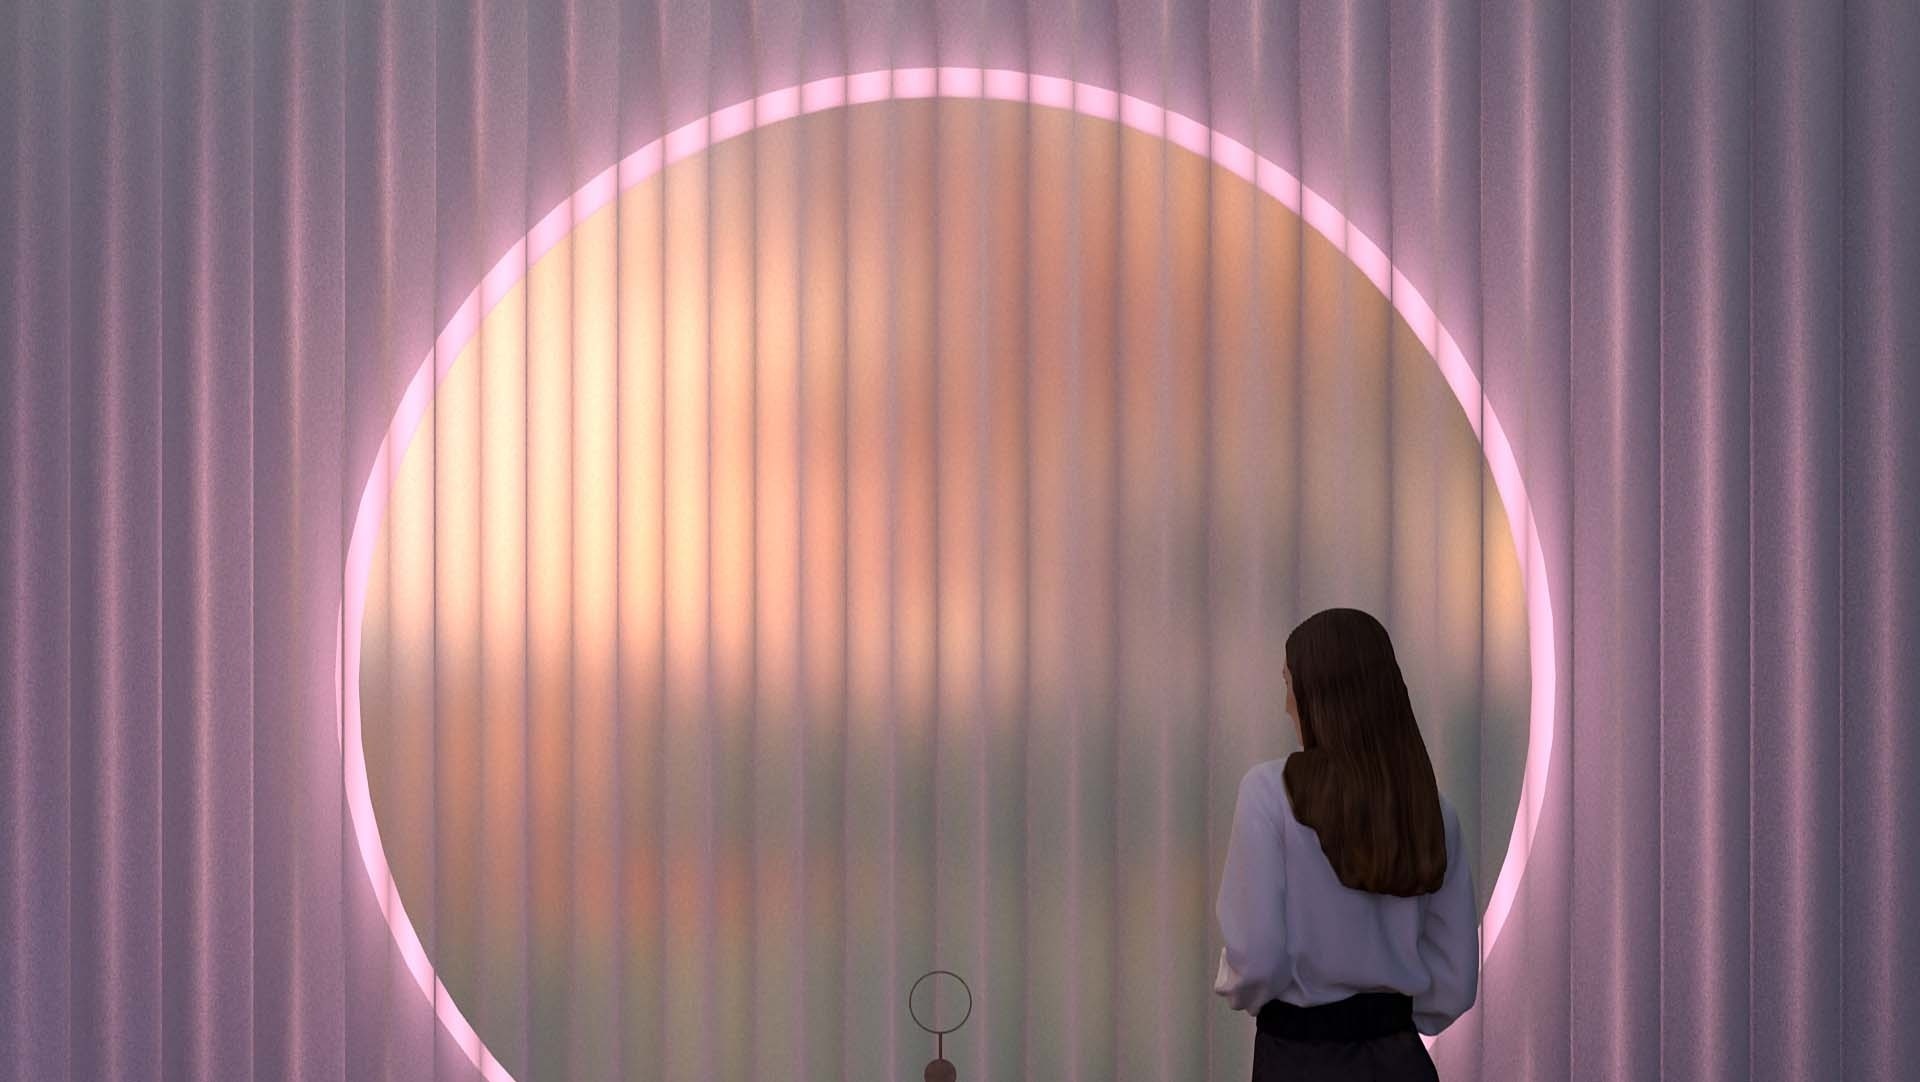 Woman standing in front of circular aperture with spring content behind sheer curtain